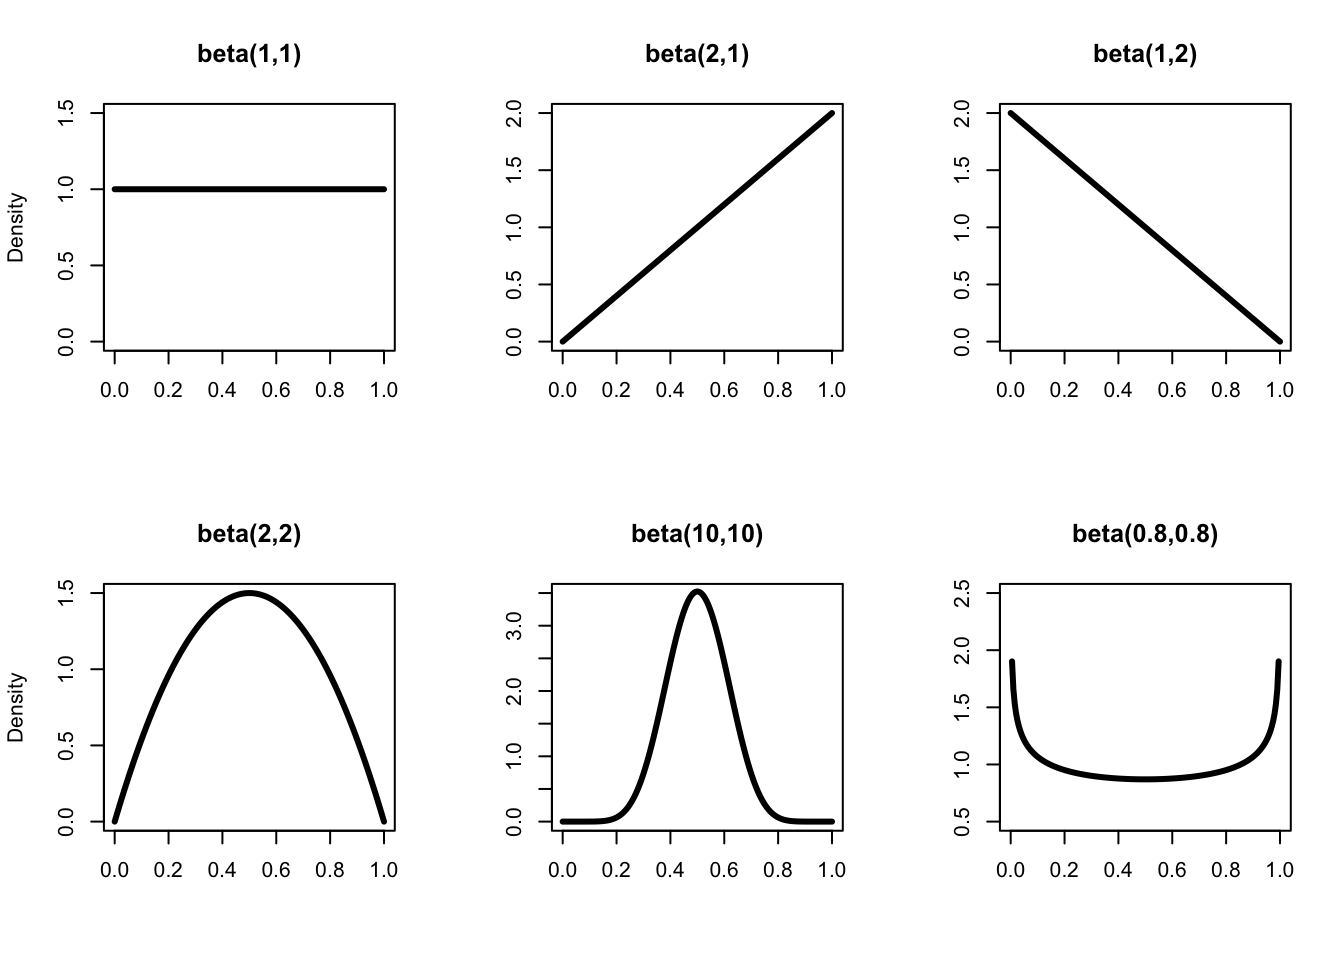 The distribution beta(\(a\),\(b\)) for different values of \(a\) and \(b\). Note that for \(a = b = 1\), we get the uniform distribution between 0 and 1 in the top left panel. When \(a\) and \(b\) are equal, the distribution is symmetric, and the bigger \(a\) and \(b\), the more peaked the distribution around the mean (the smaller the variance). The expectation (or mean) of a beta(\(a\),\(b\)) is \(\displaystyle{\frac{a}{a + b}}\).